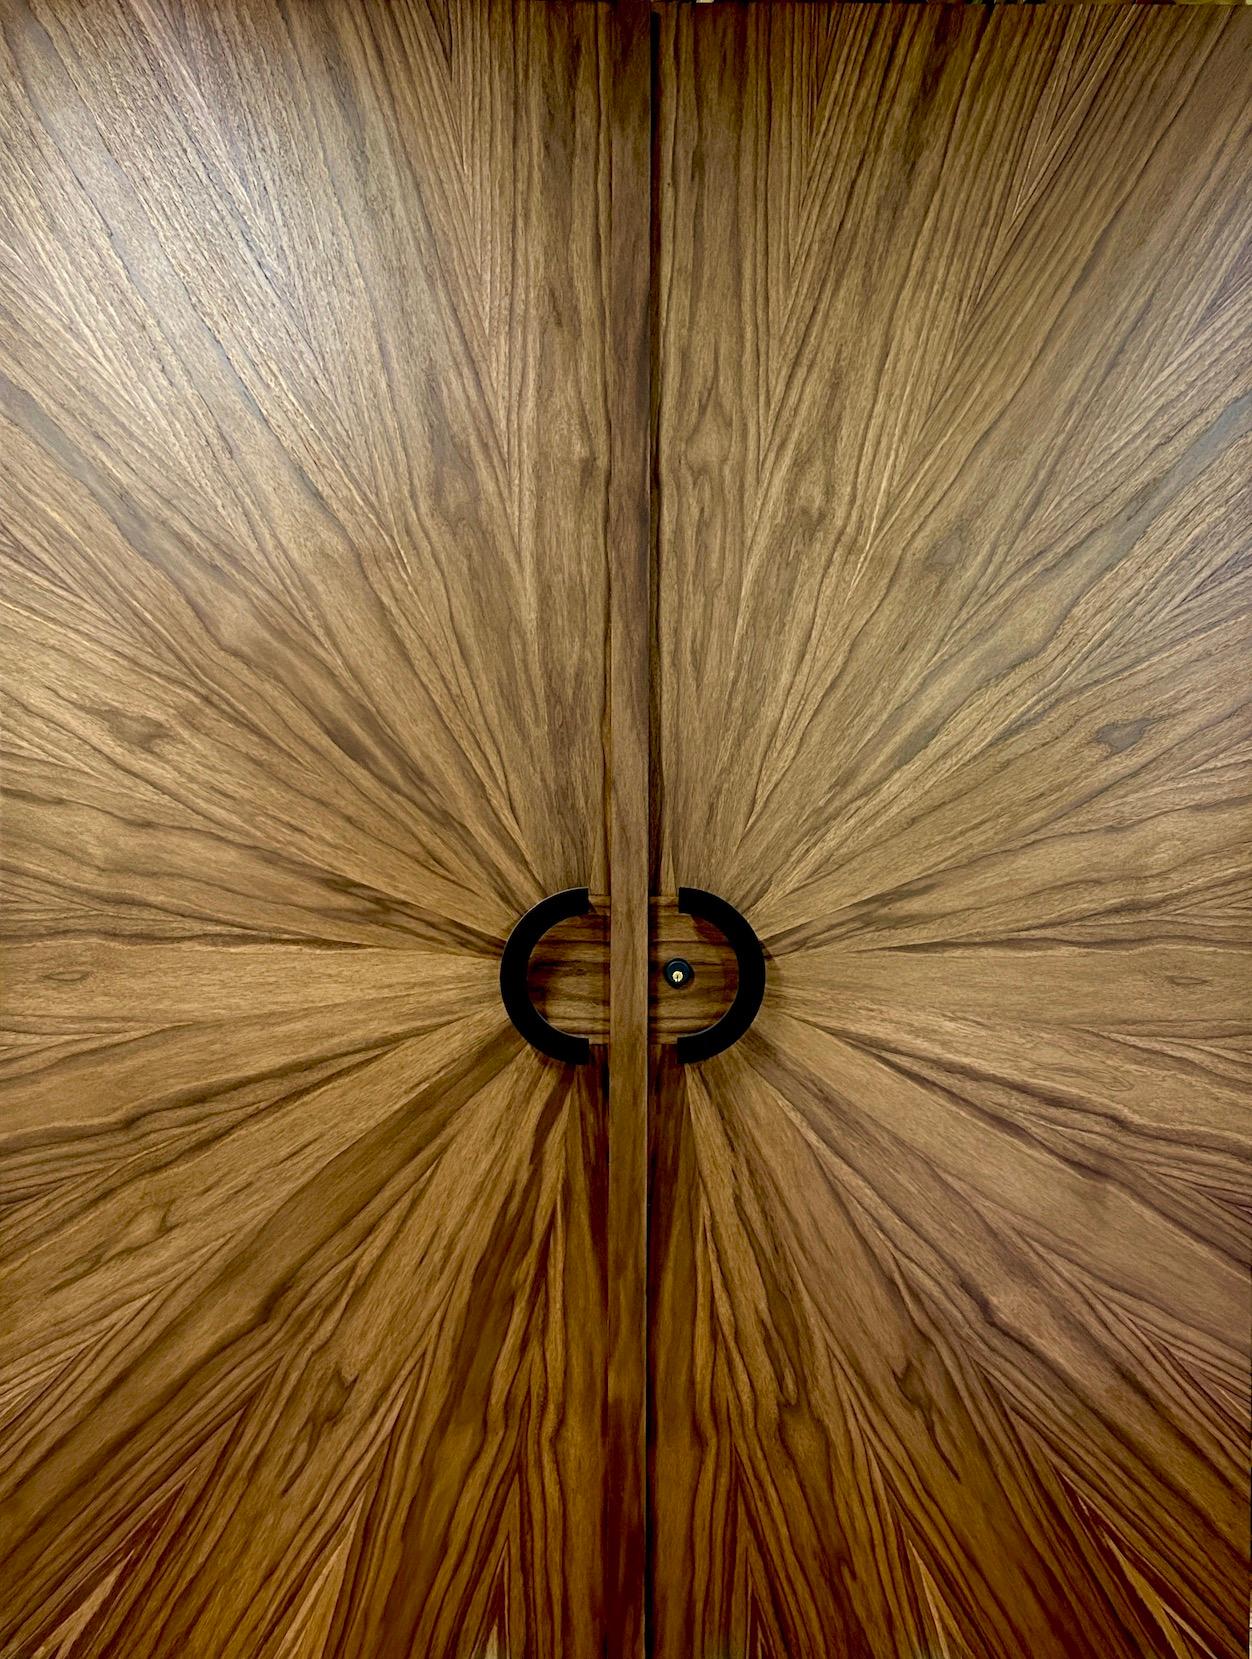 Model radial sunburst walnut.
Made to order by History Never Repeats LLC. Designed by Aaron Saxton & Maria Armada. Custom produced double doors. As shown 103